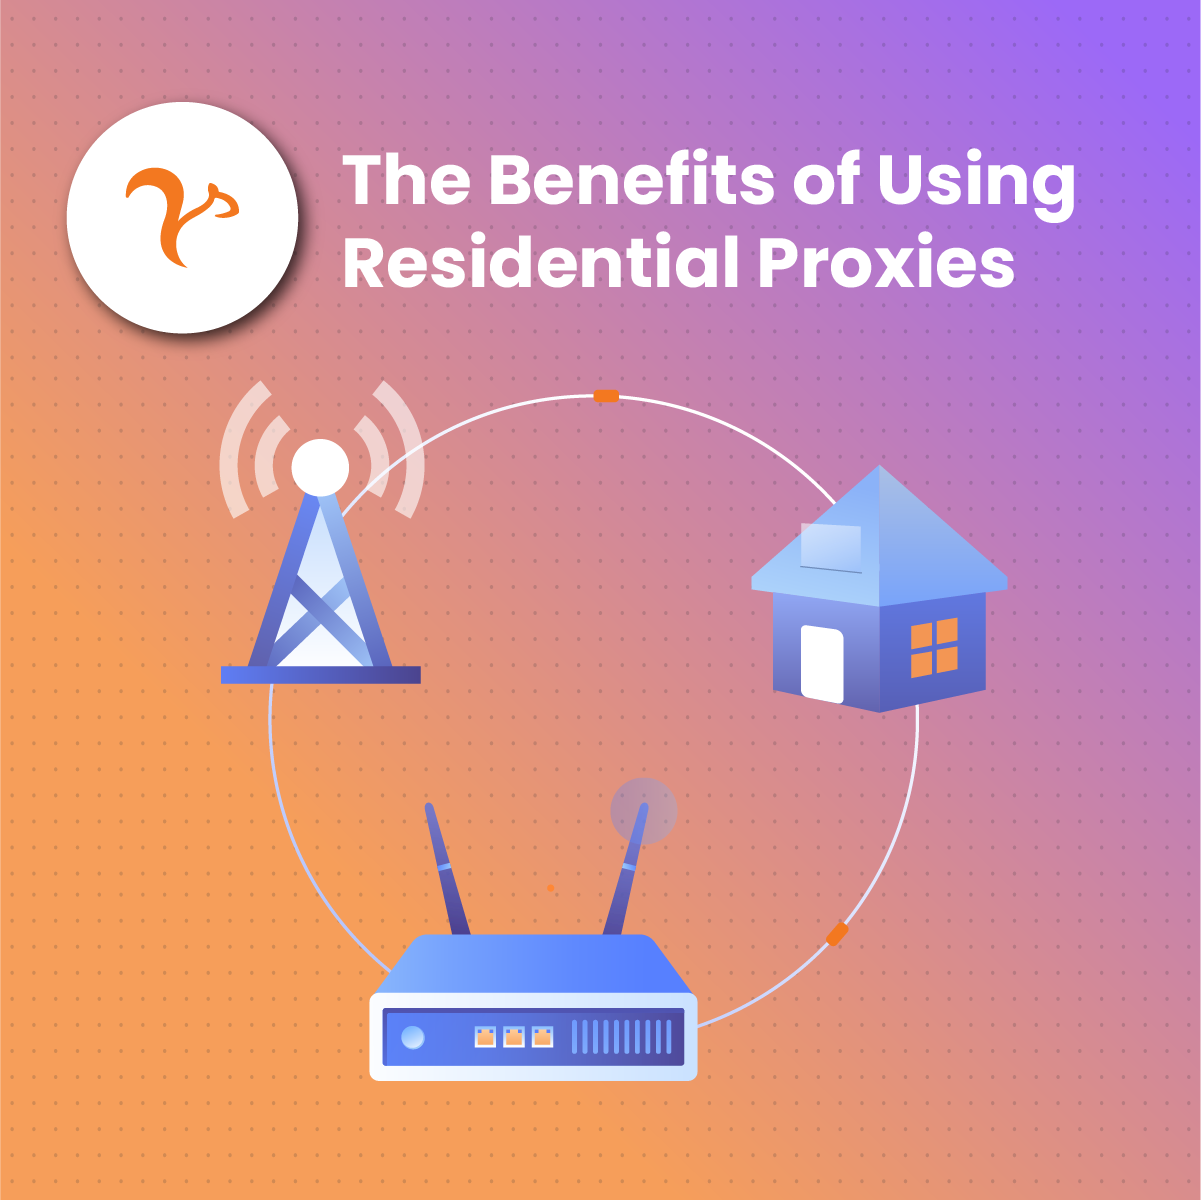 The Benefits of Using Residential Proxies